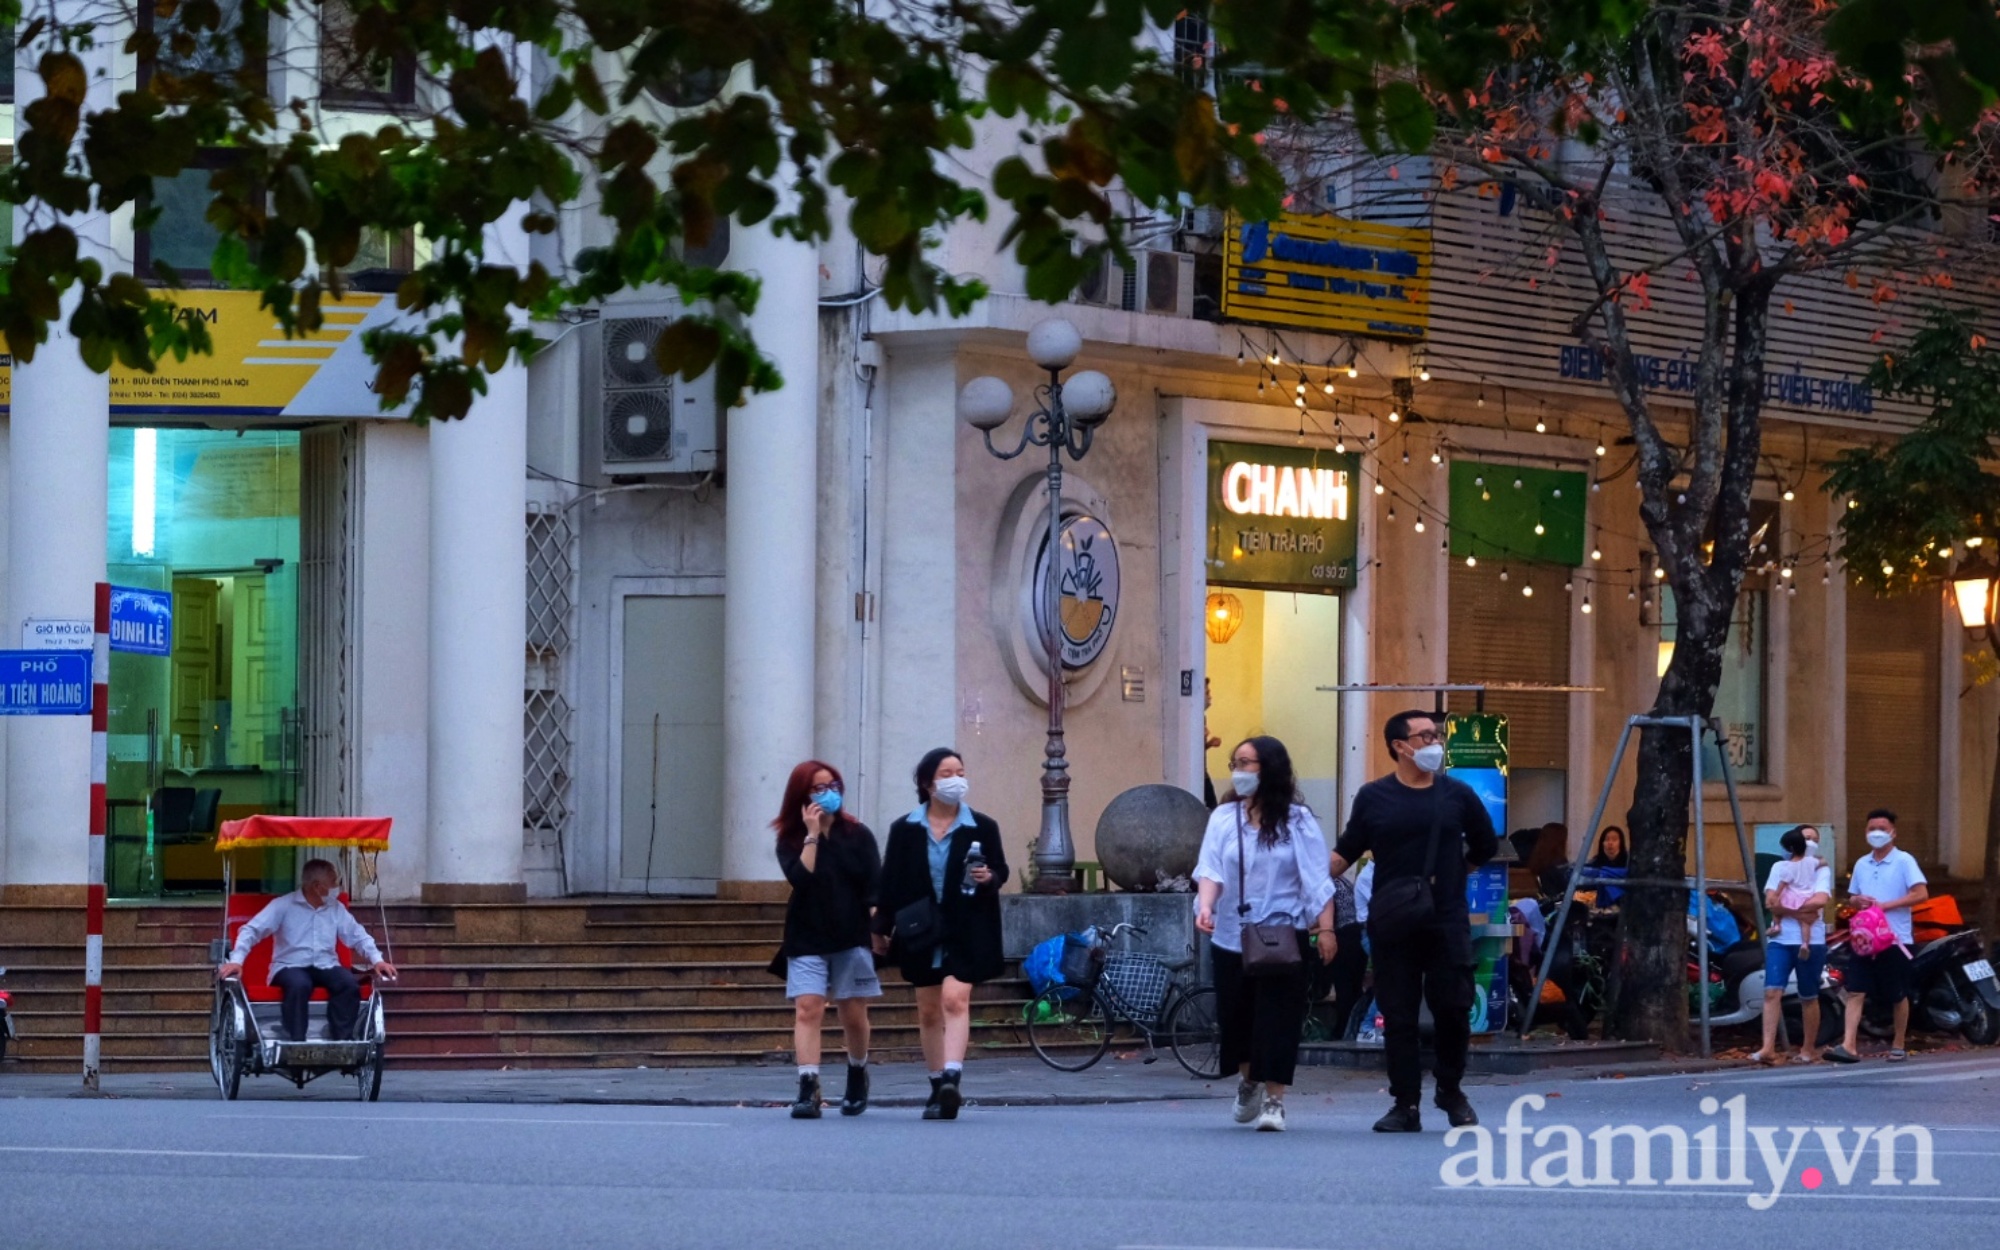 Street lights up, Hanoians put on street clothes to walk after nearly a year of reopening - Photo 1.